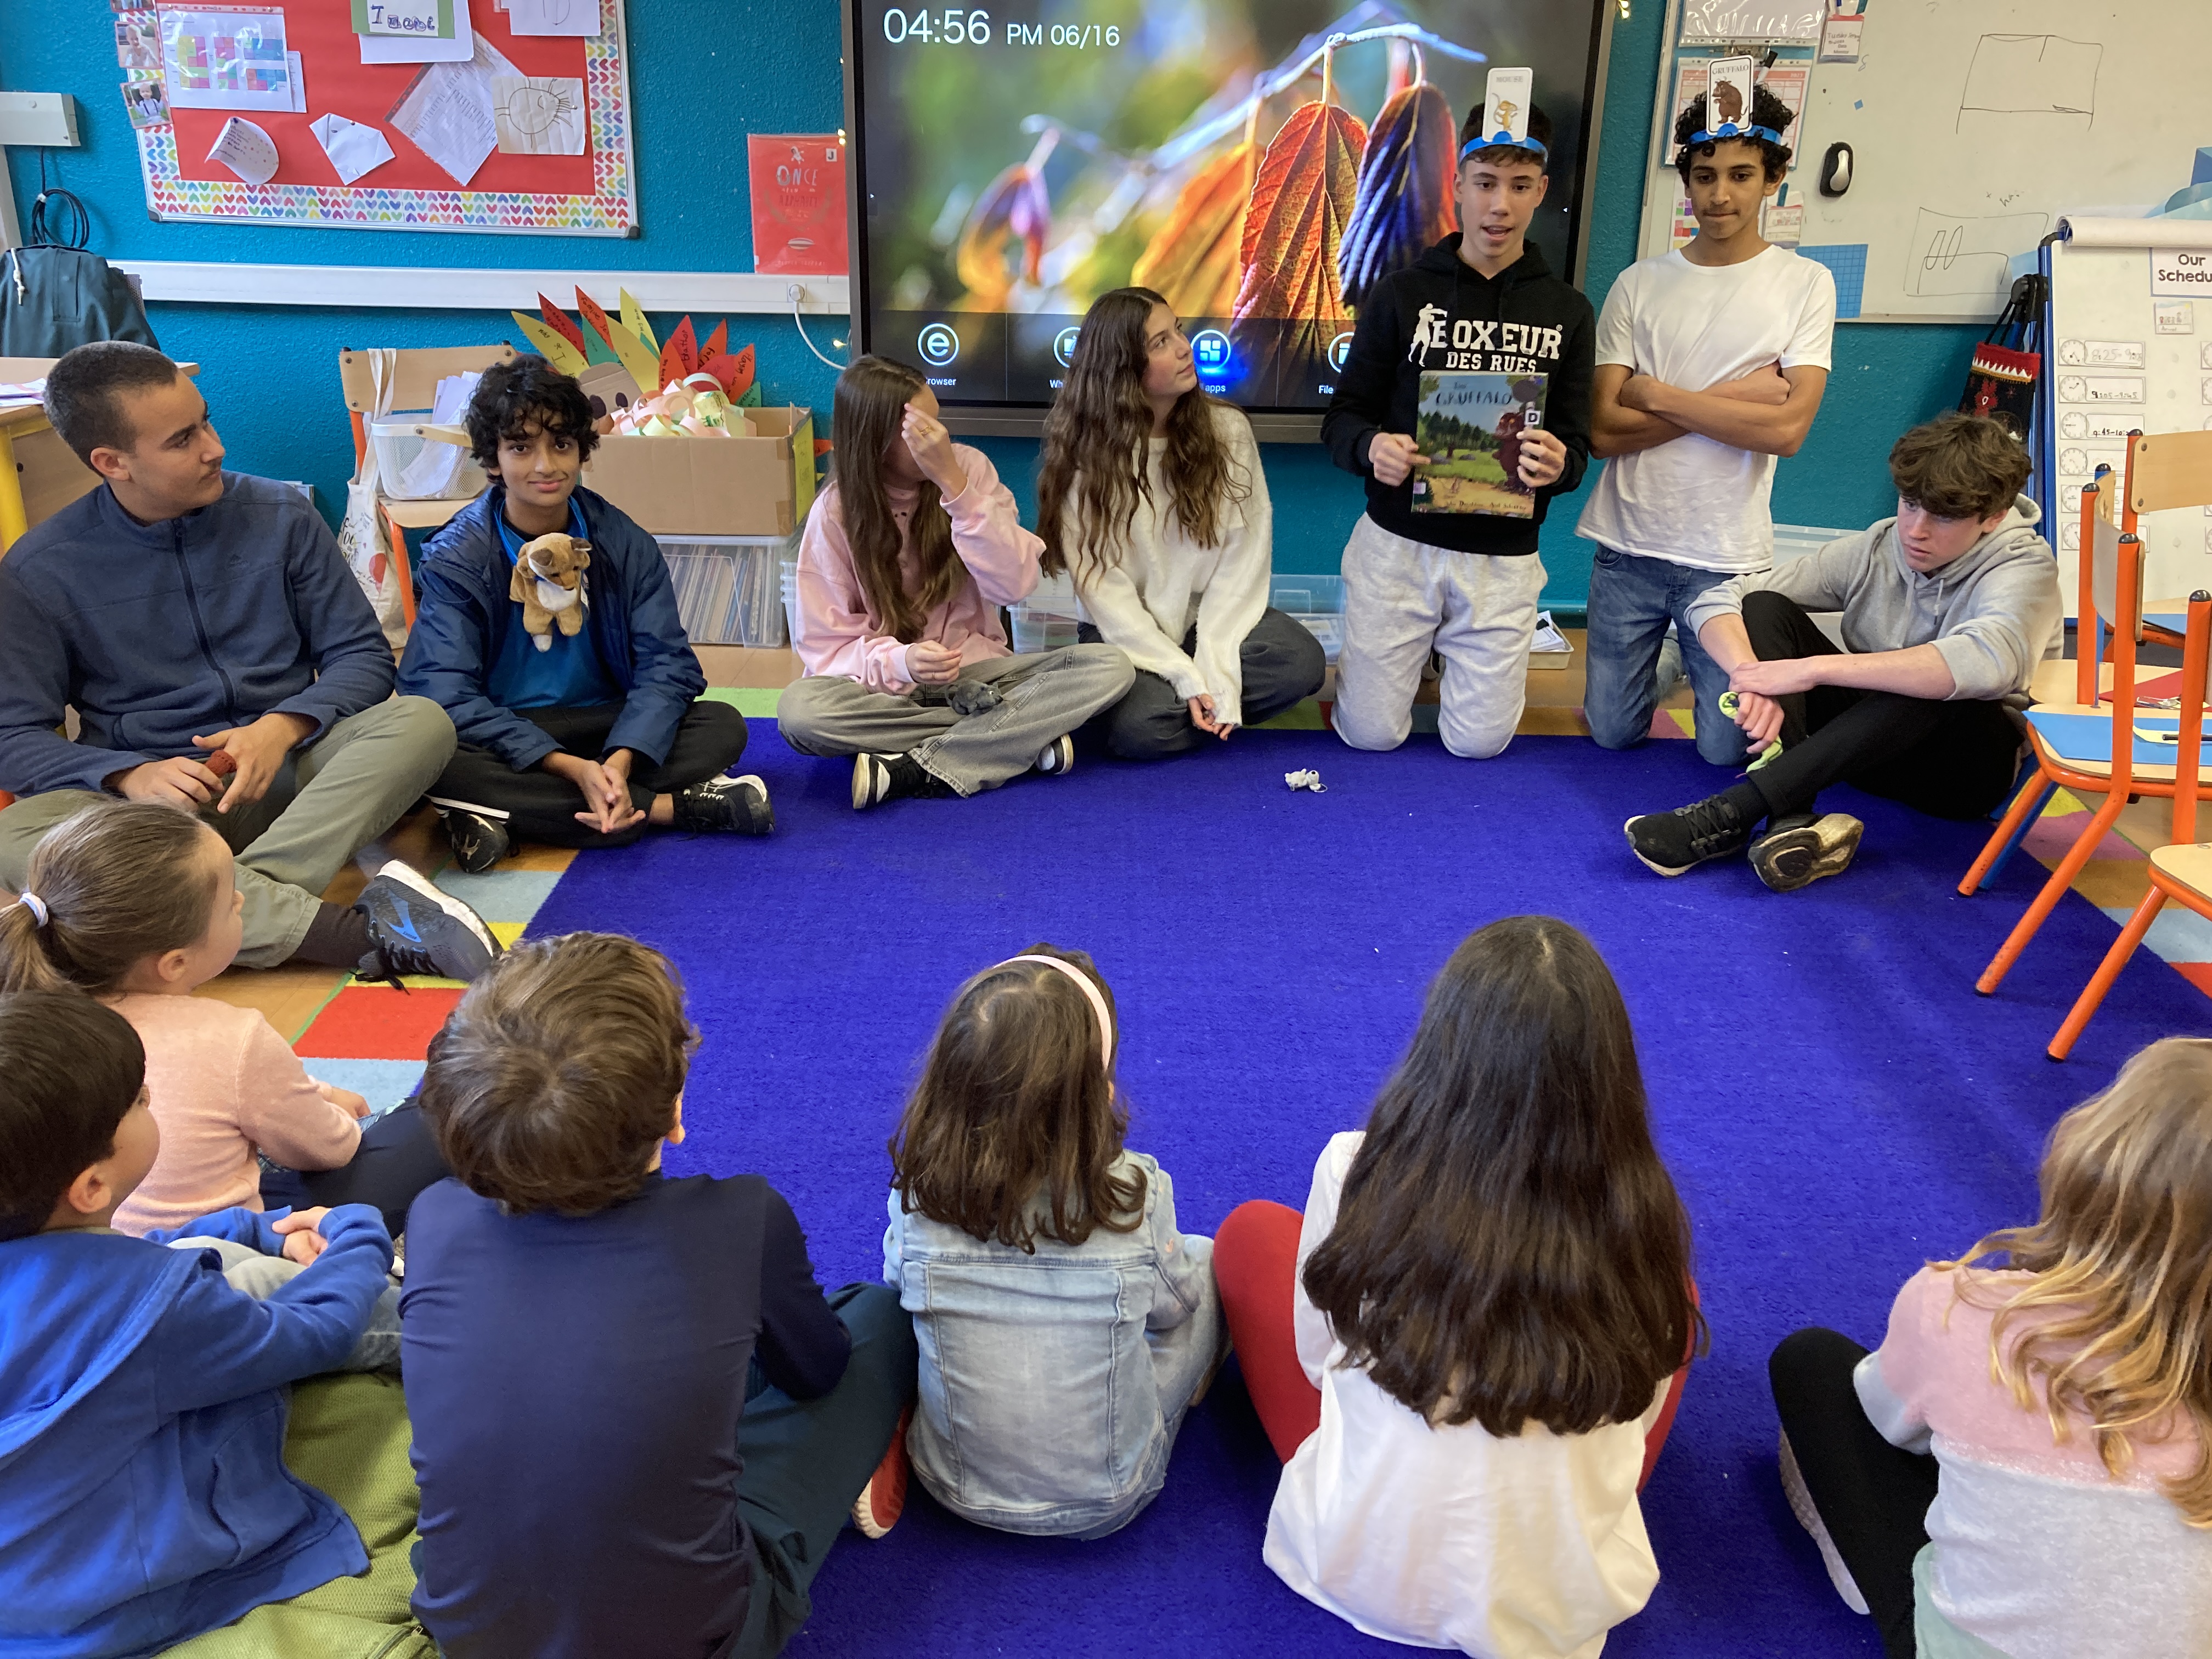 Grade 9 and kindergarten students sitting in a circle on a blue carpet in a kindergarten classroom.